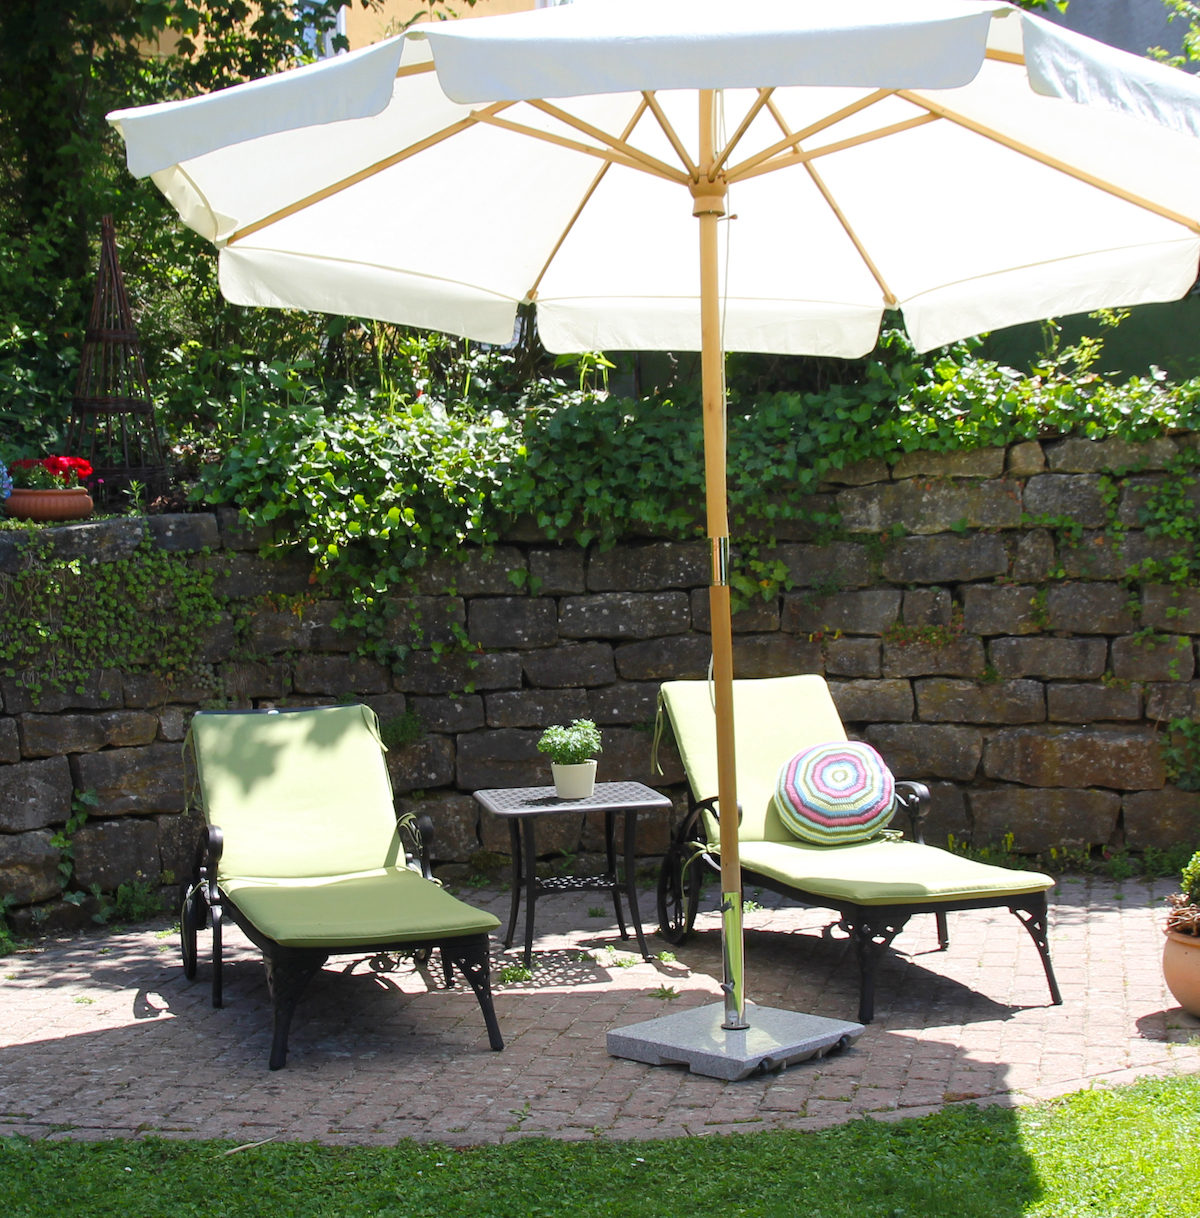 Which type or style of outdoor furniture set is the best value for money - Garden Loungers